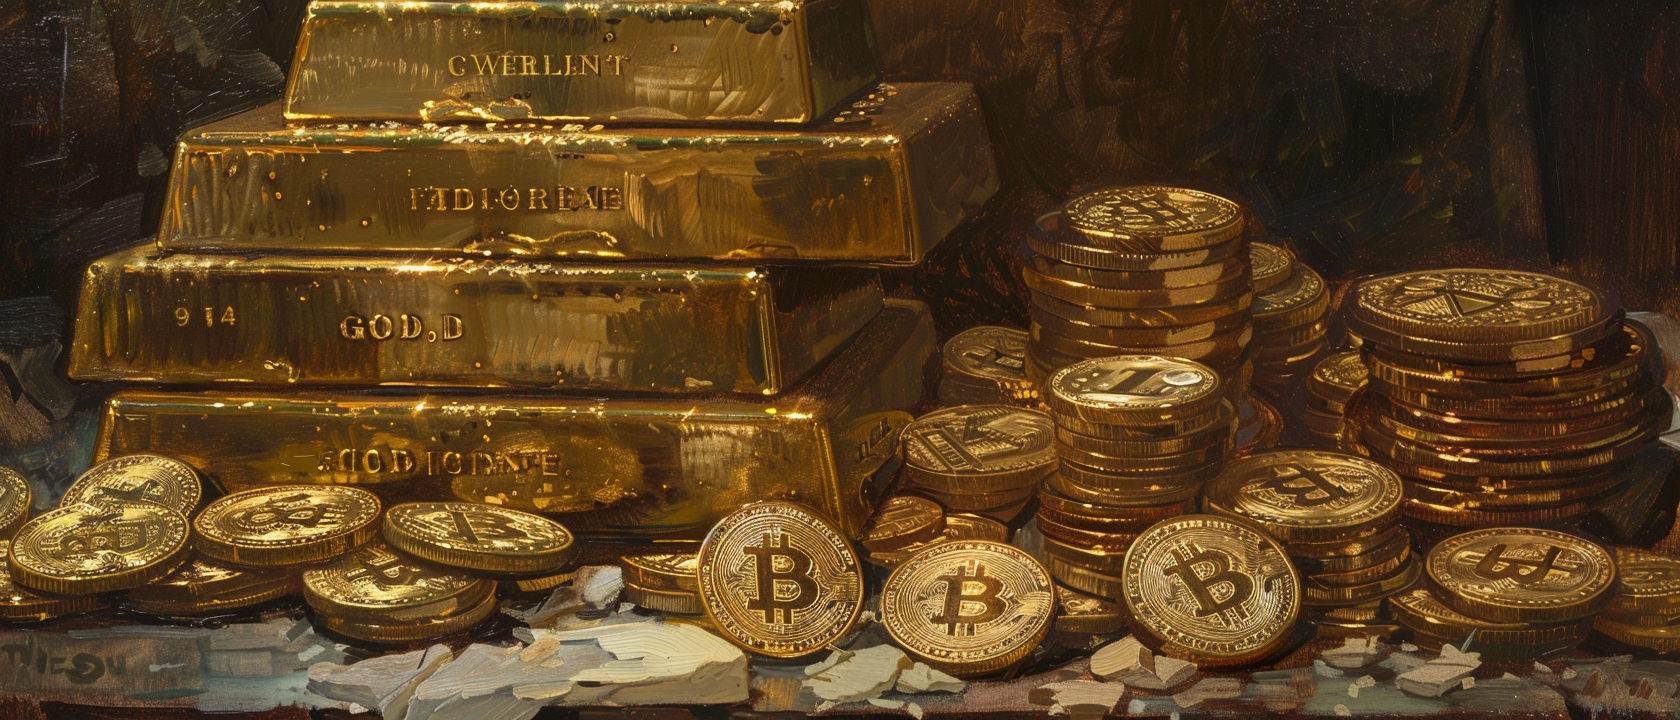 From Gold to Bitcoin: Andy Schectman's Perspectives on a Transforming Economy